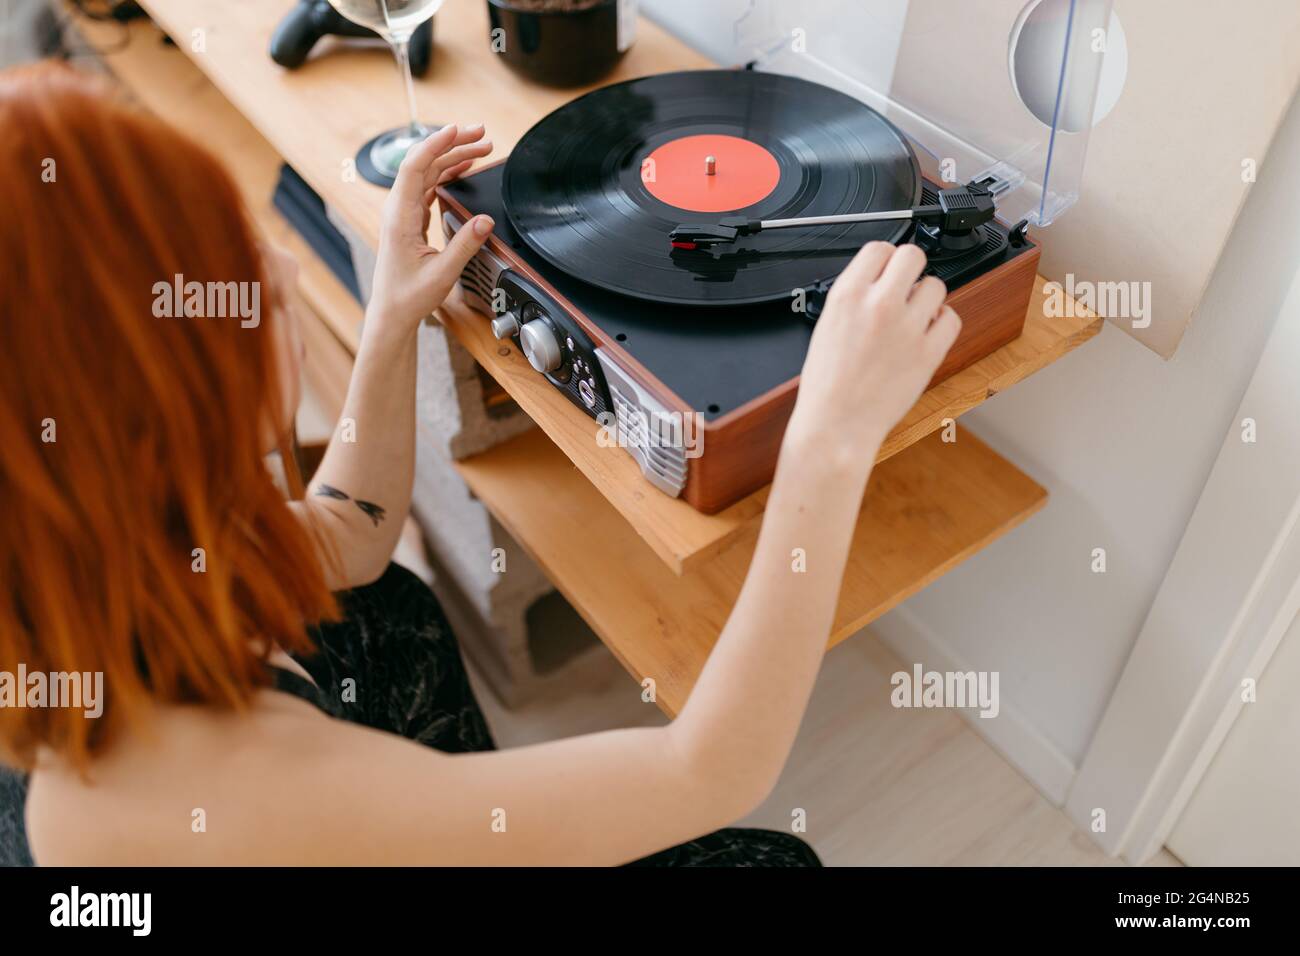 From above side view of crop anonymous female turning on retro record player on shelf in house Stock Photo